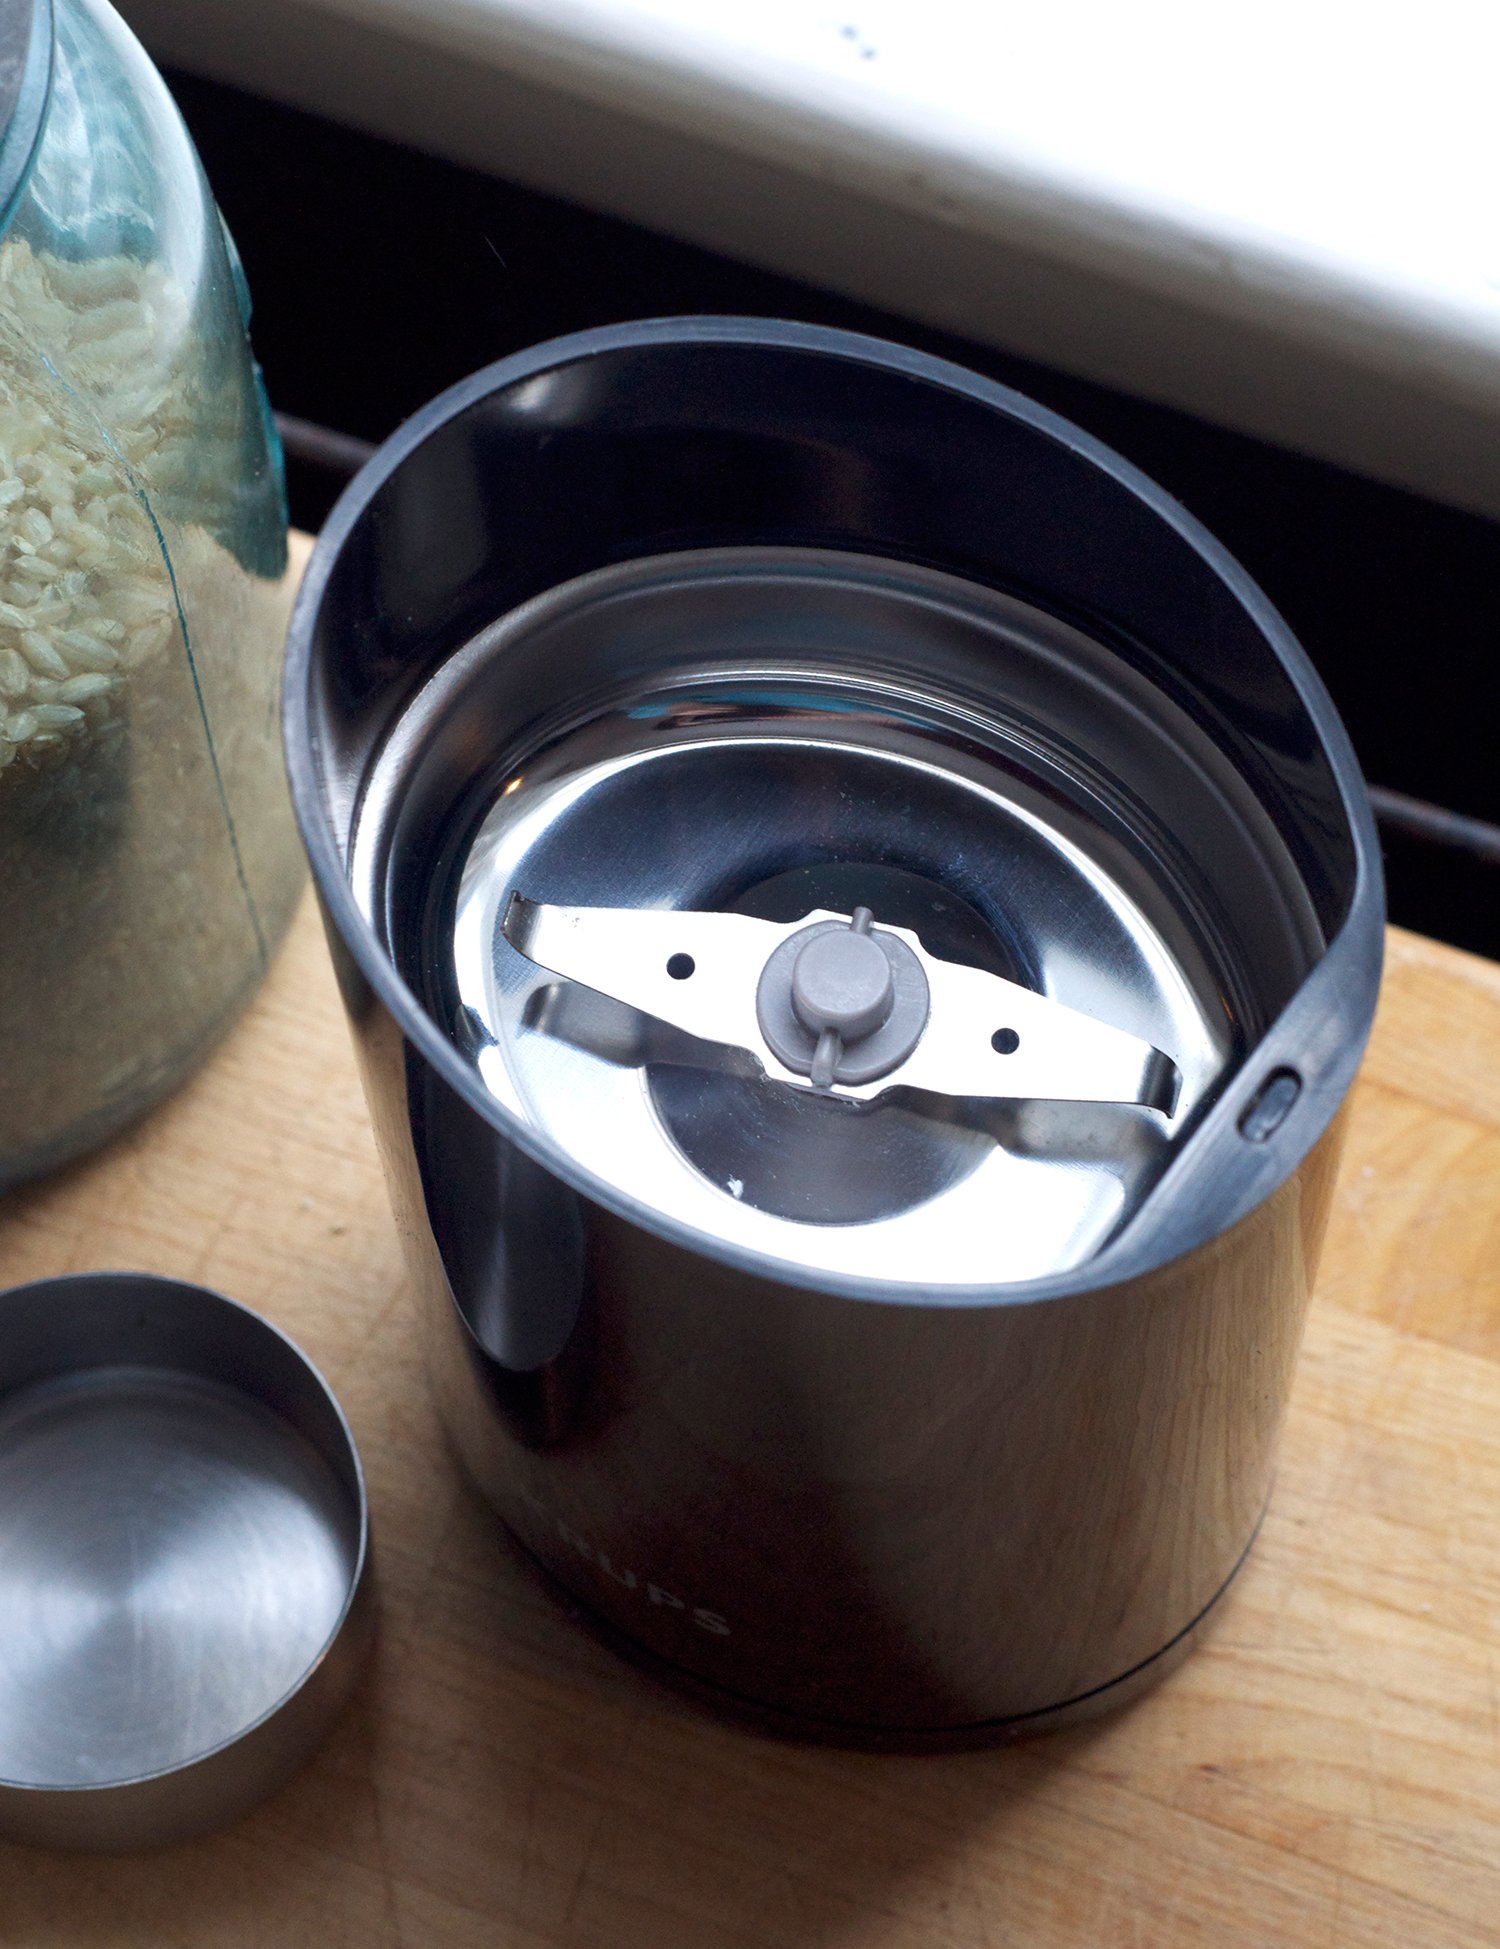 Sometimes a Coffee Grinder Is Better than a Mortar and Pestle